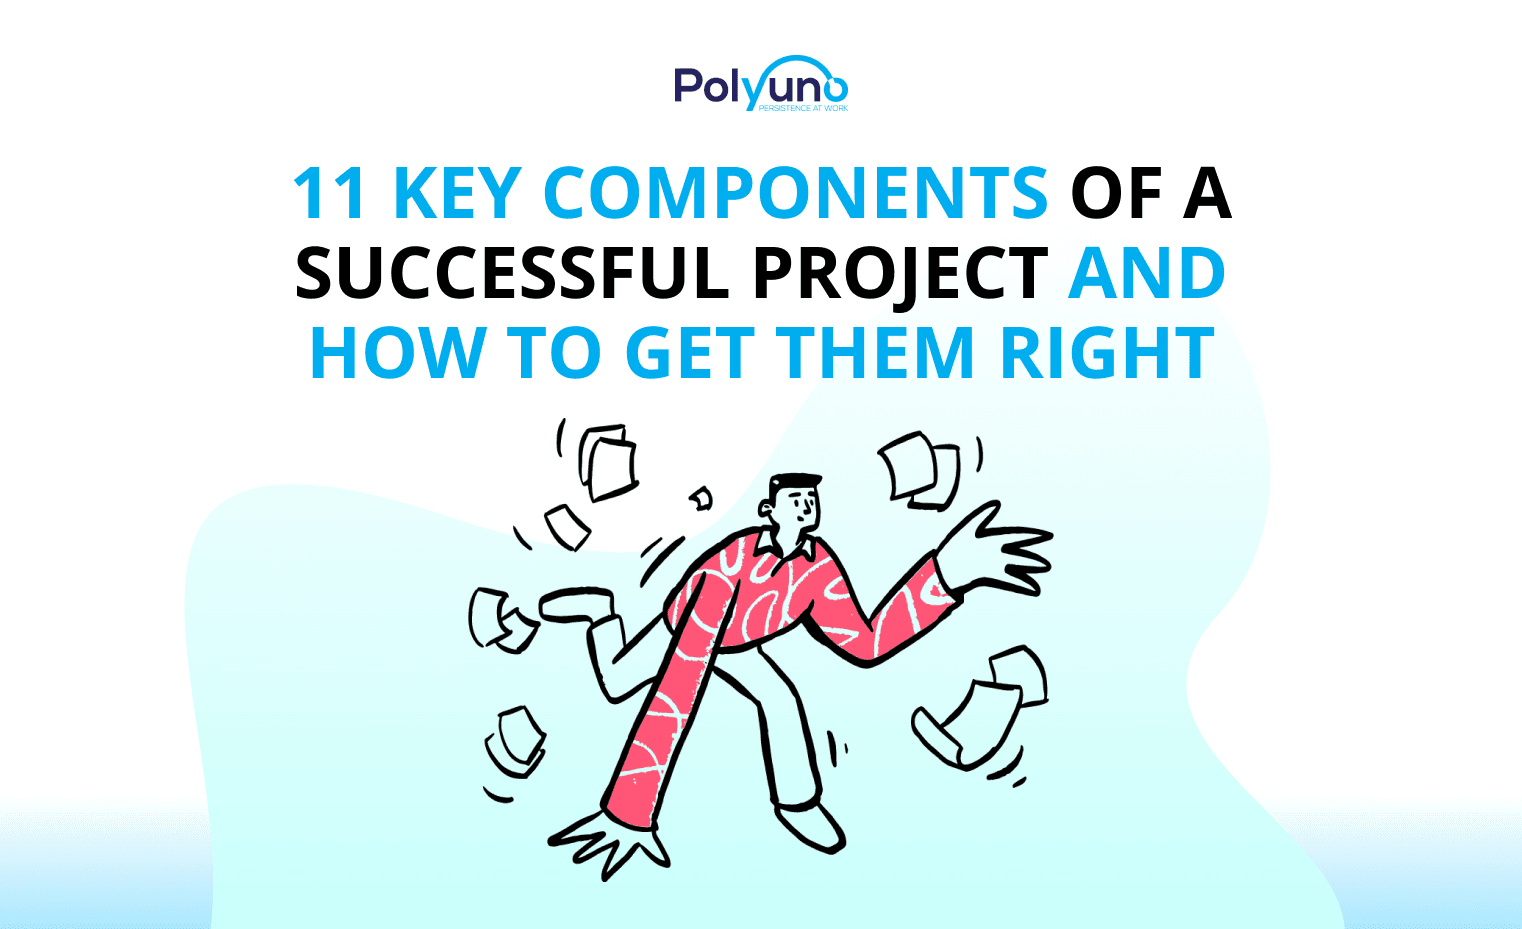 11 Key Components Of A Successful Project And How To Get Them Right